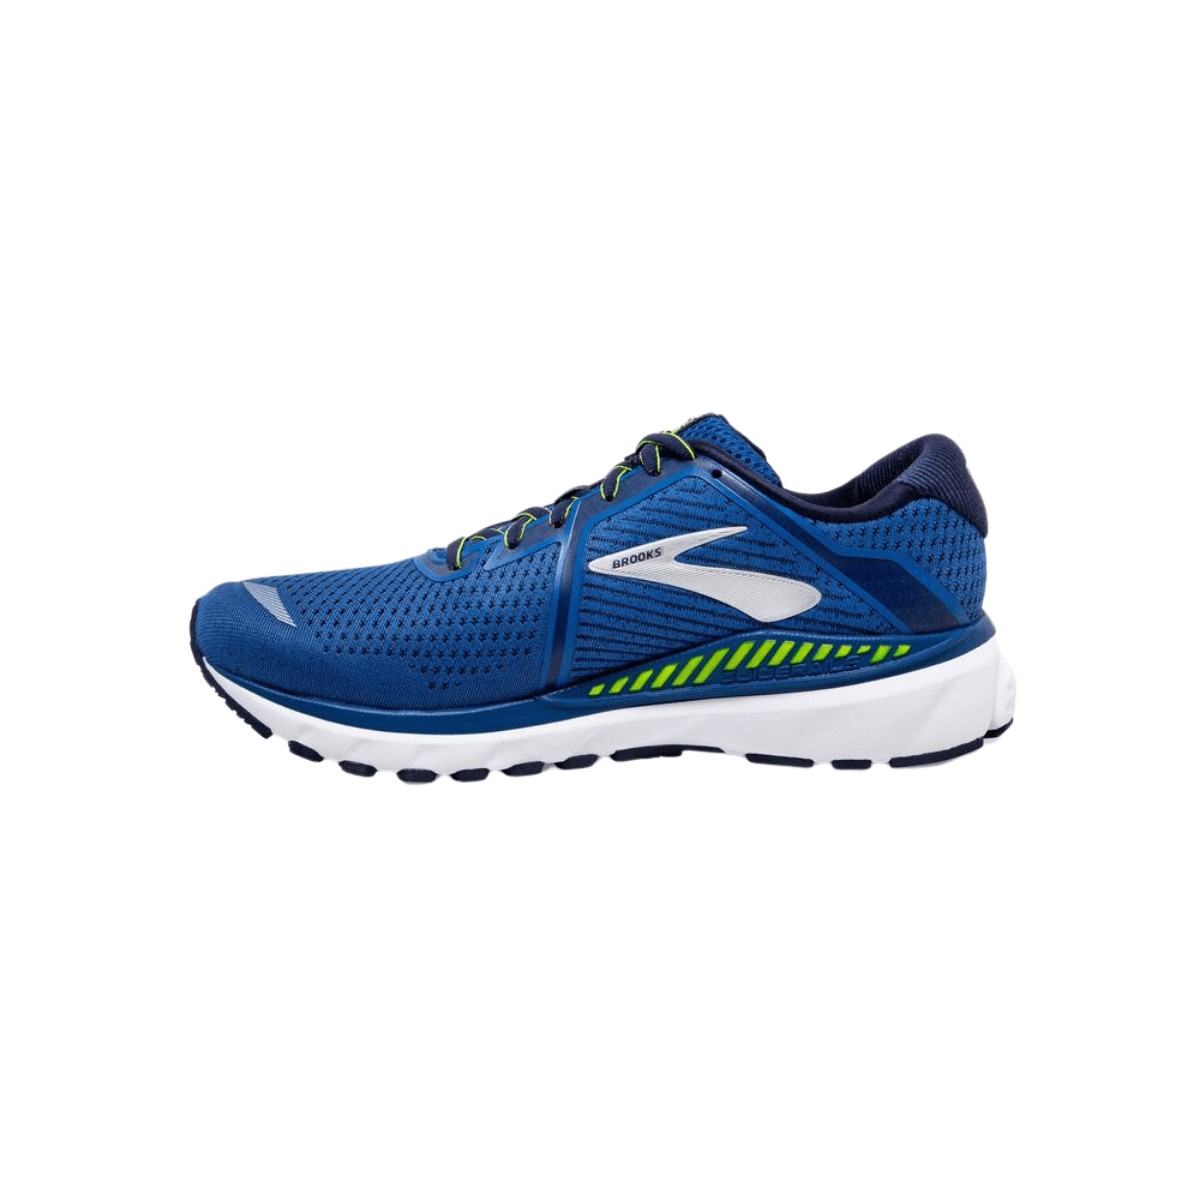 Brooks Adrenaline GTS 20 Blue AW20 Shoes